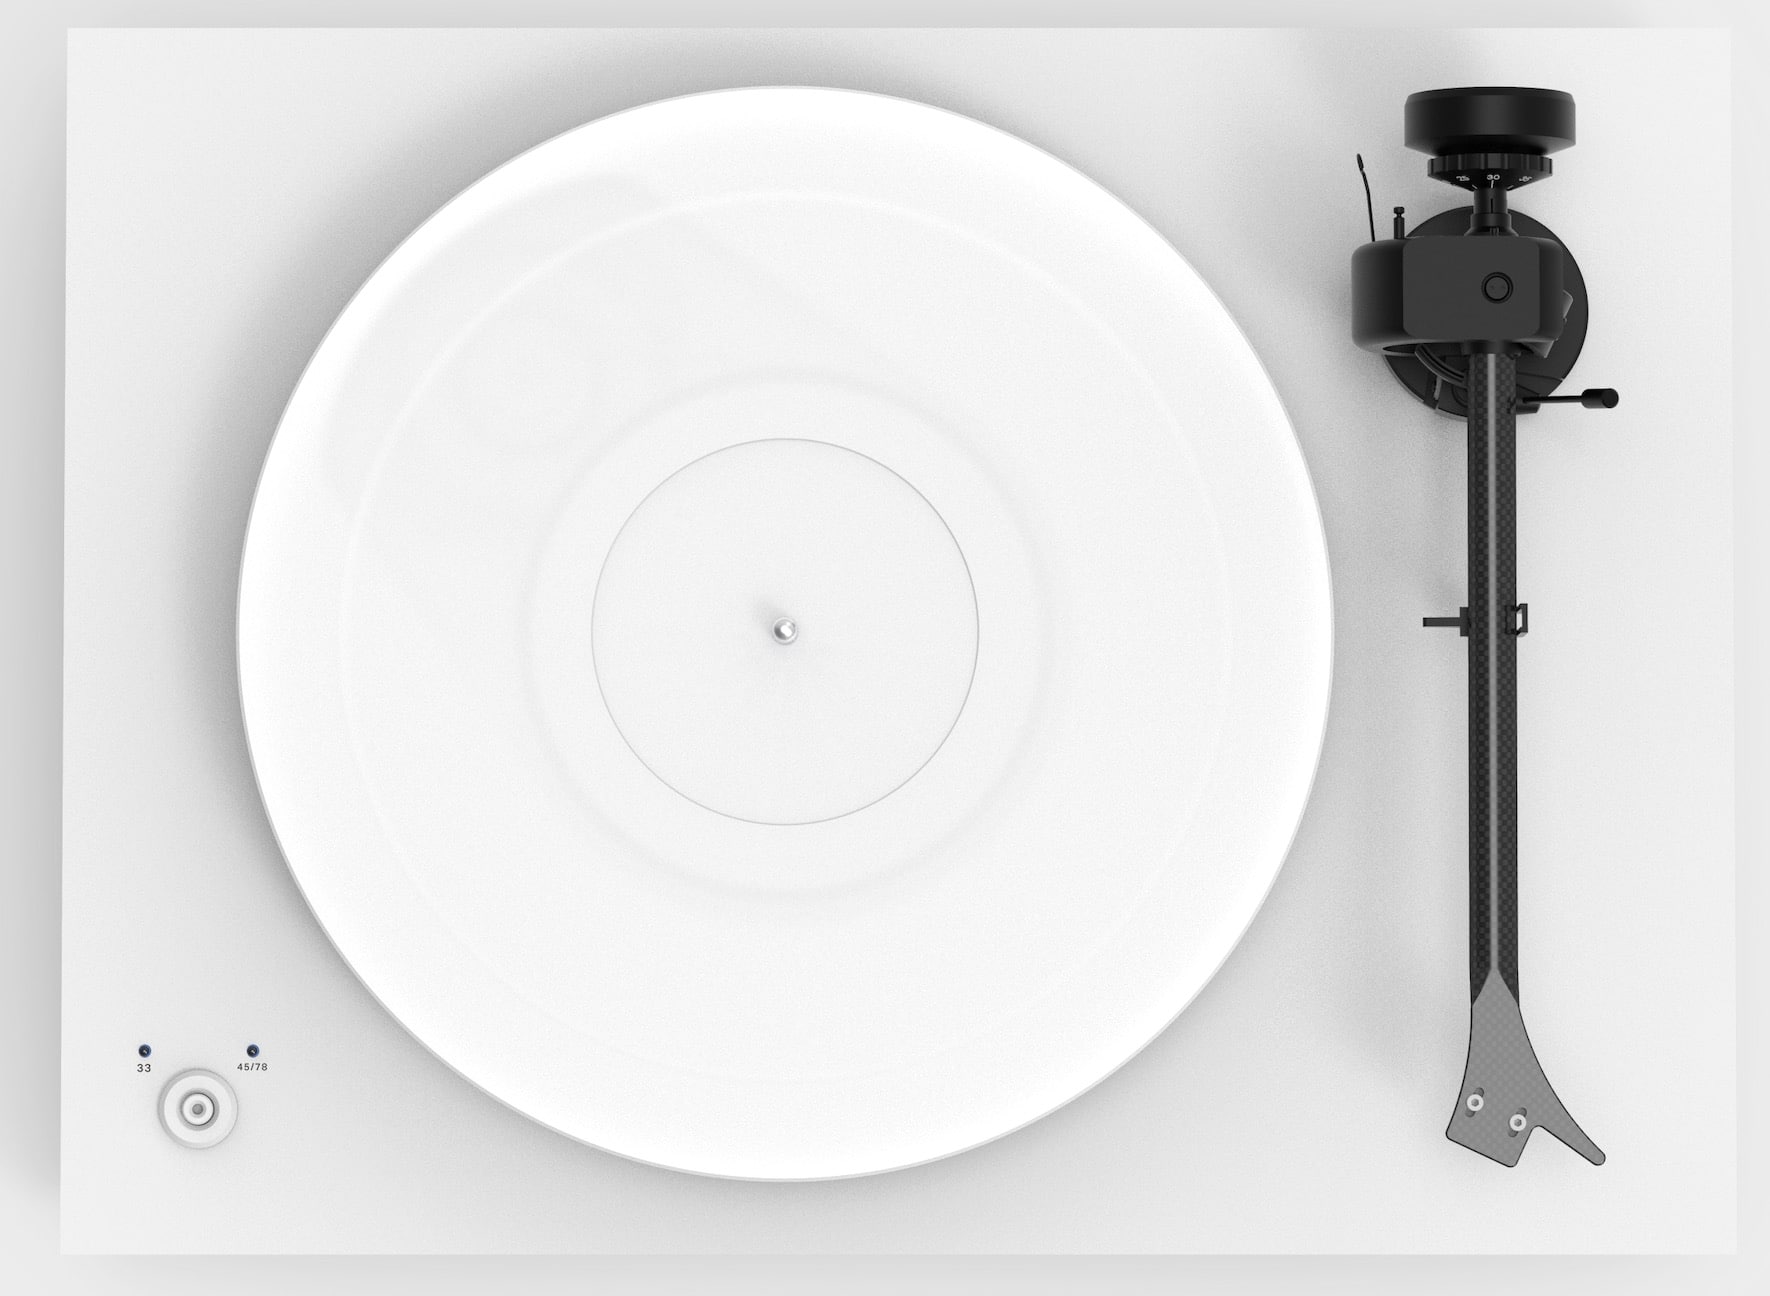 X2 Turntable From Pro-Ject With 2M Silver